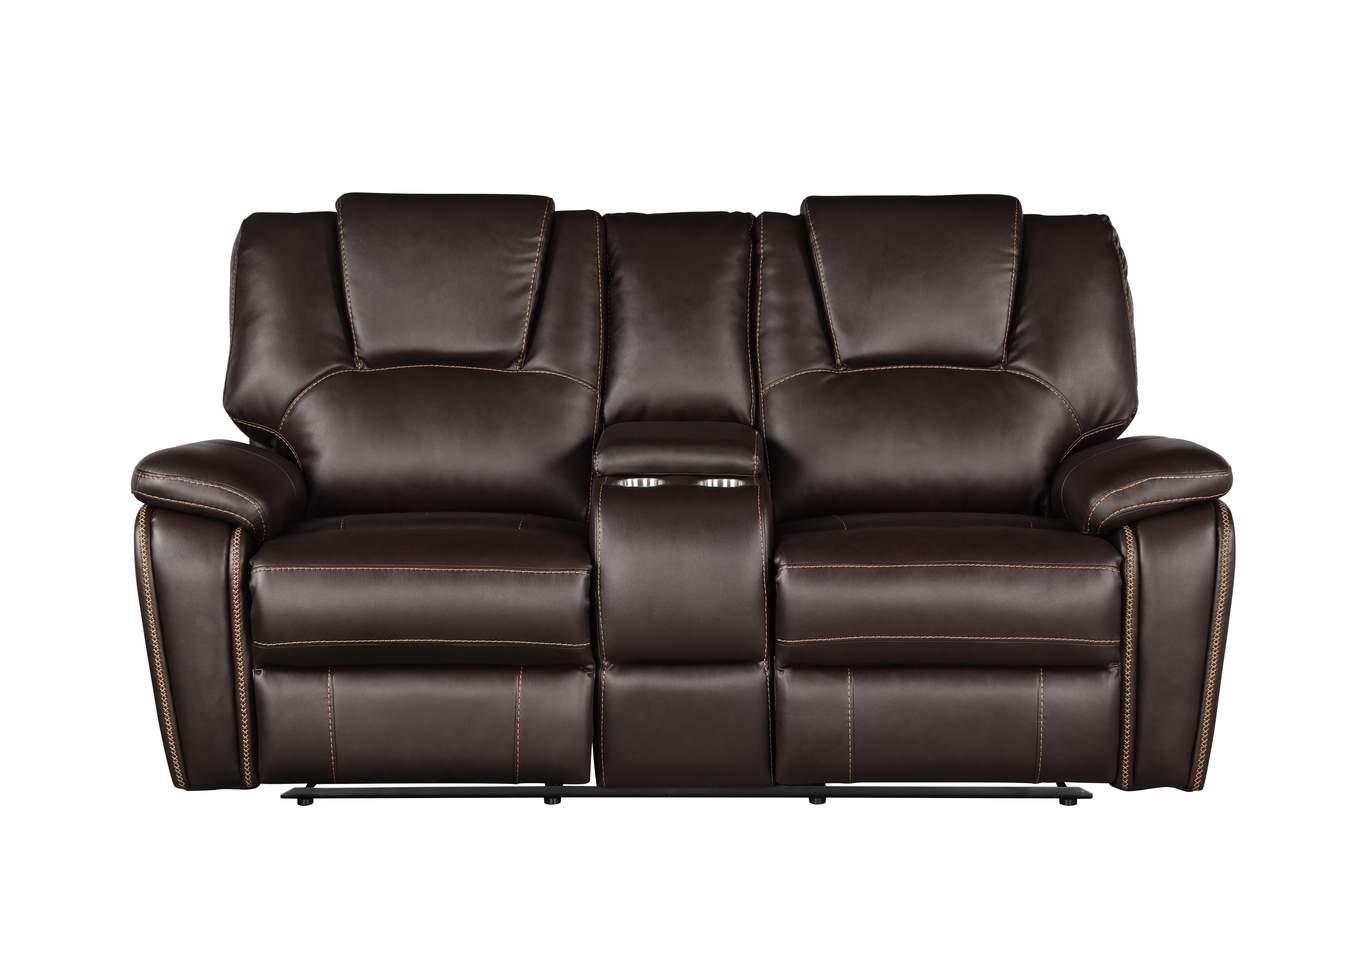 Contemporary, Modern Recliner Loveseat Hongkong 733569398461 in Brown Eco Leather